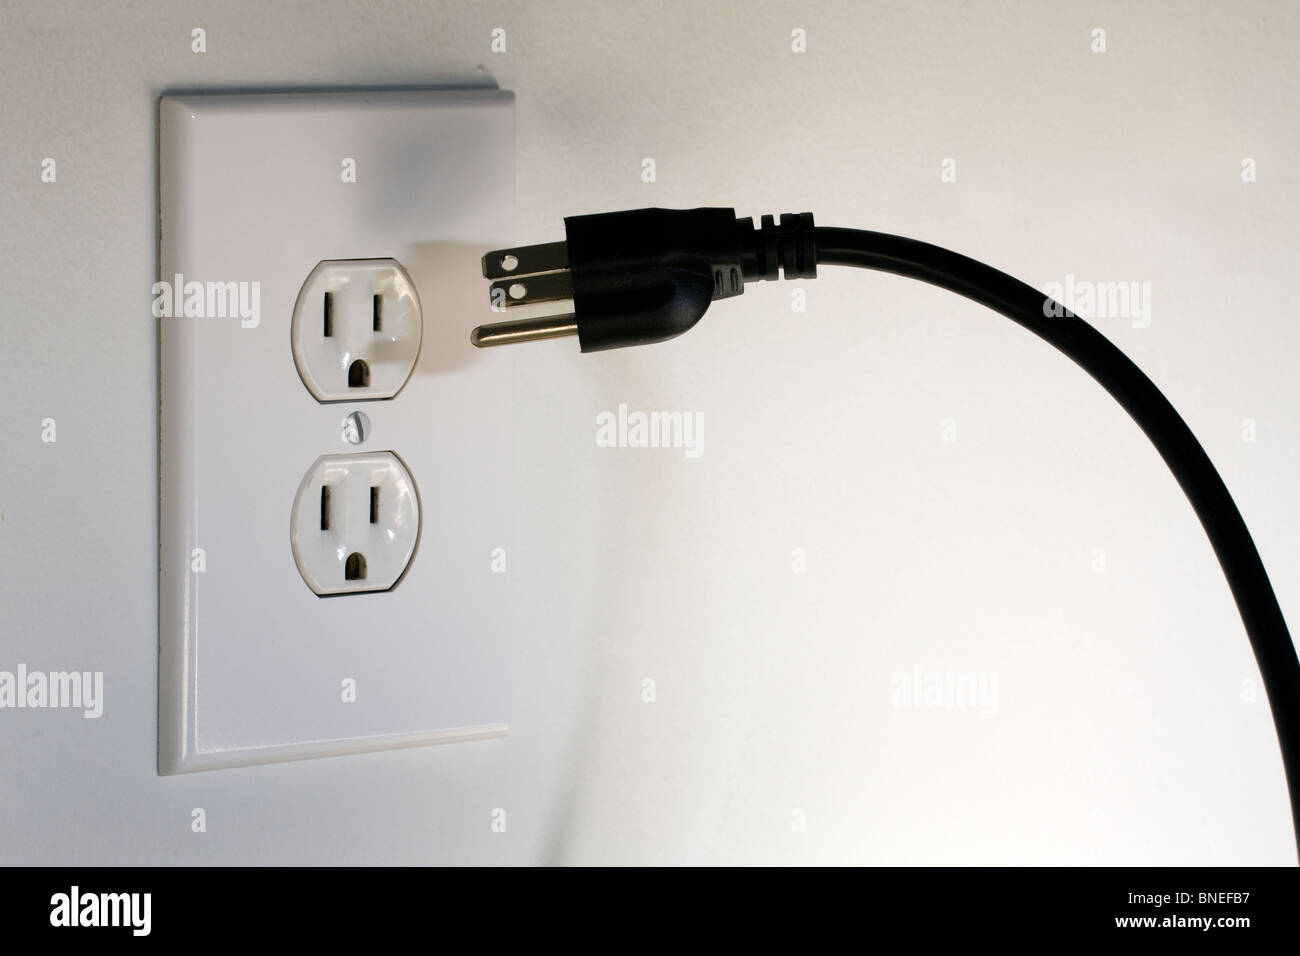 American Three Pronged Plug hovering in front of a 110 Volt A/C Electrical Outlet Stock Photo